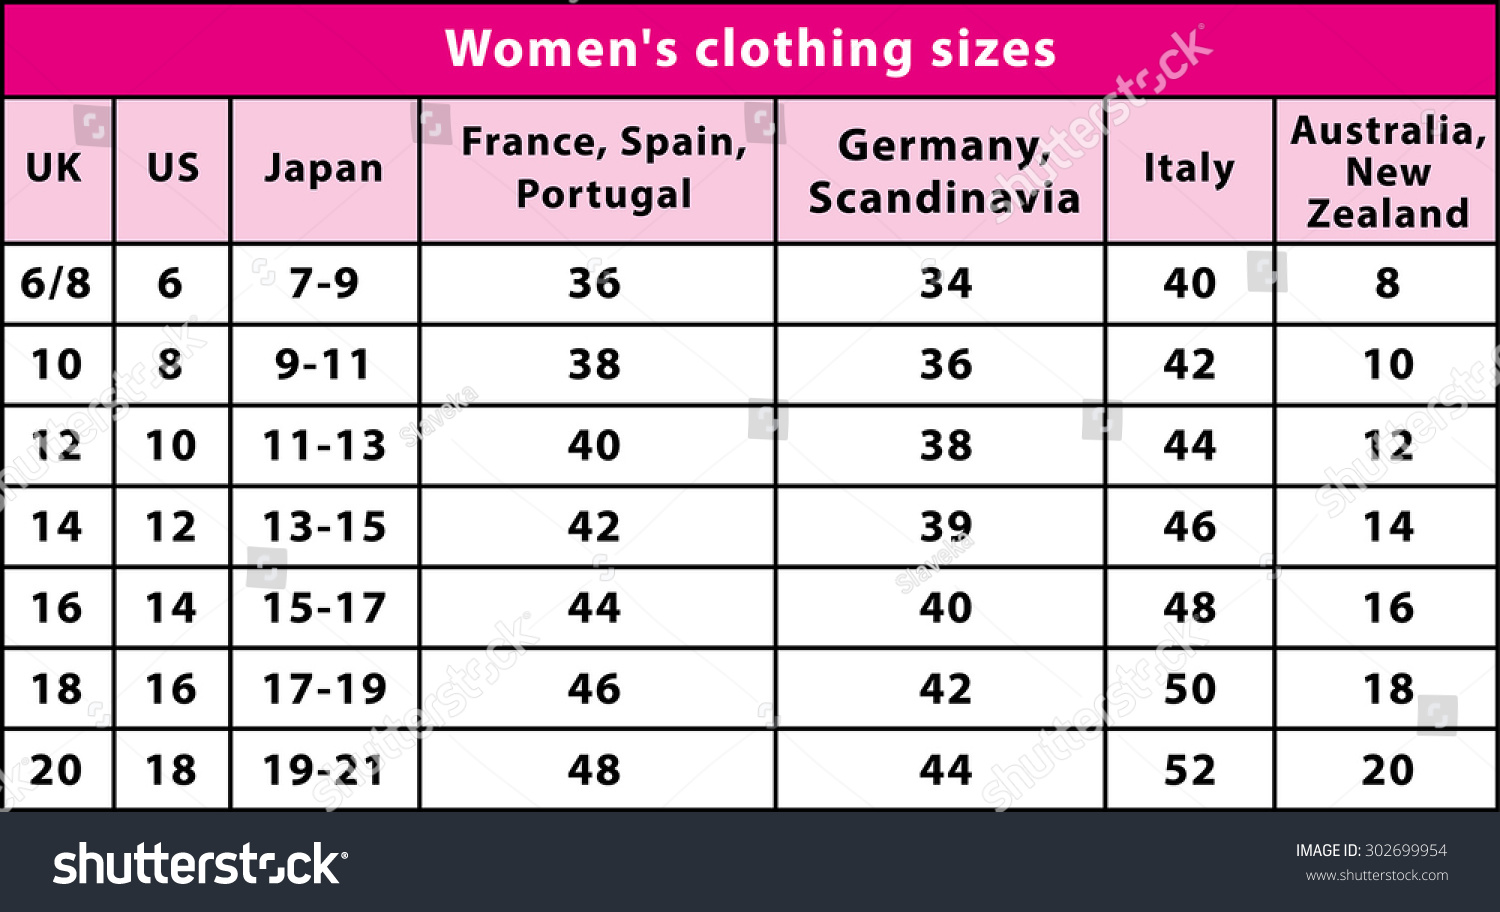 us size 10 in eu clothes